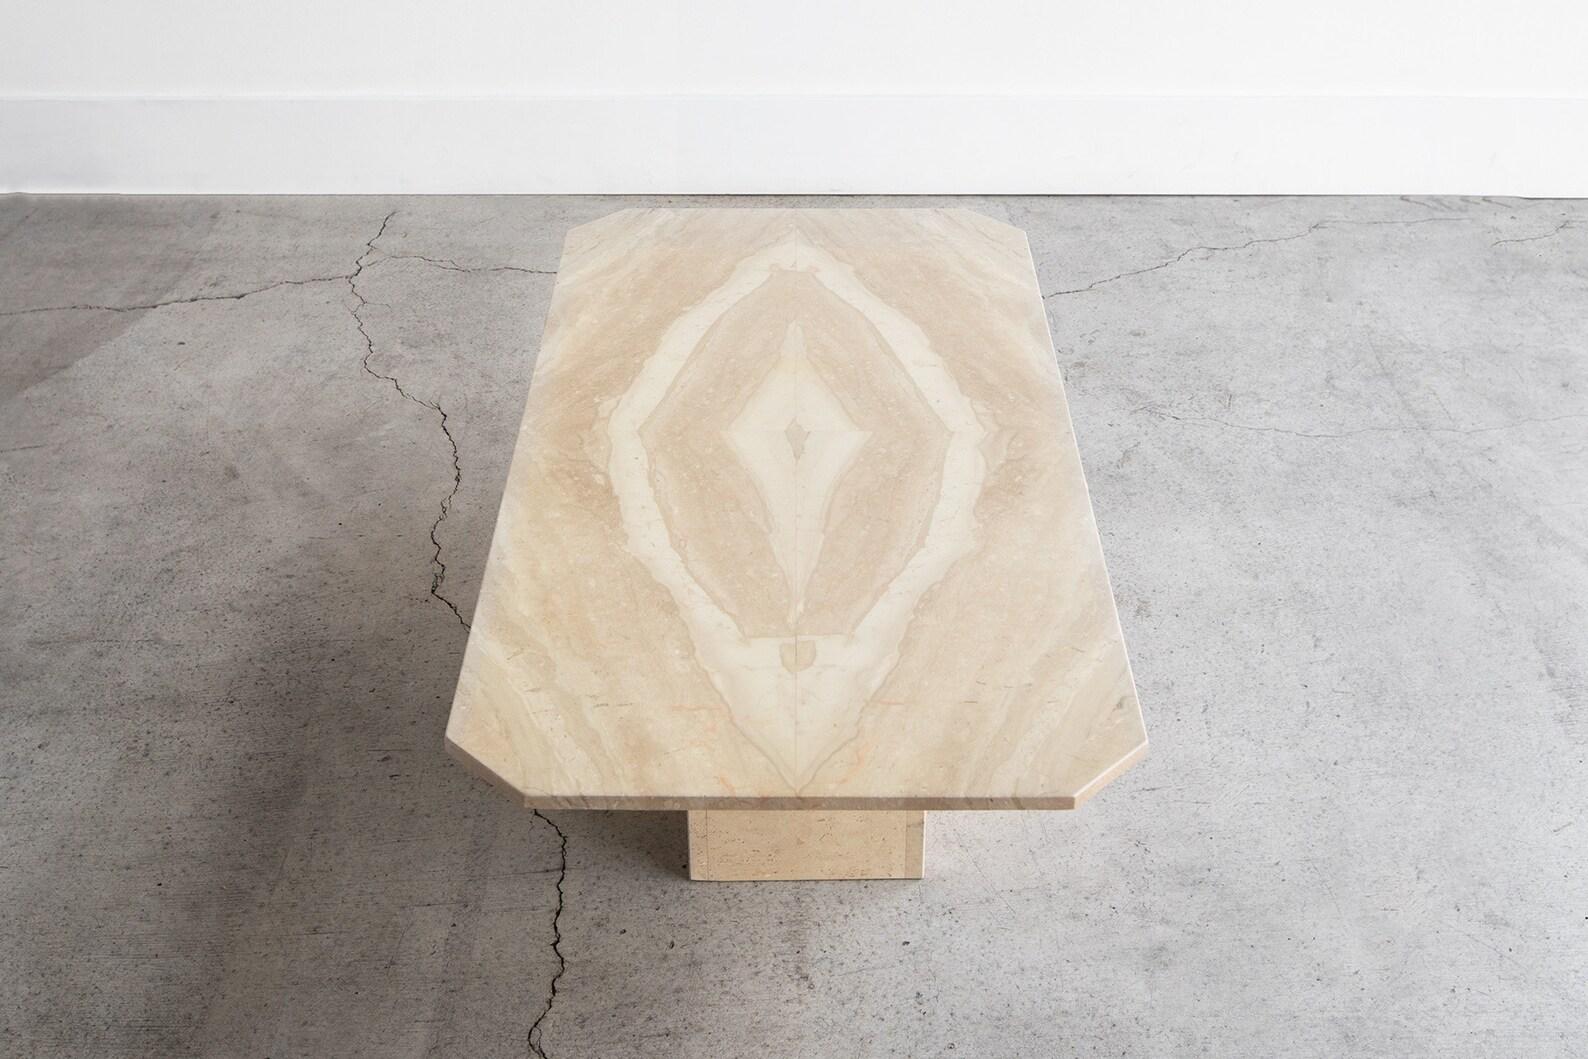 Late 20th Century Vintage Italian Travertine Pedestal Coffee Table Diamond Pattern Made in Italy For Sale